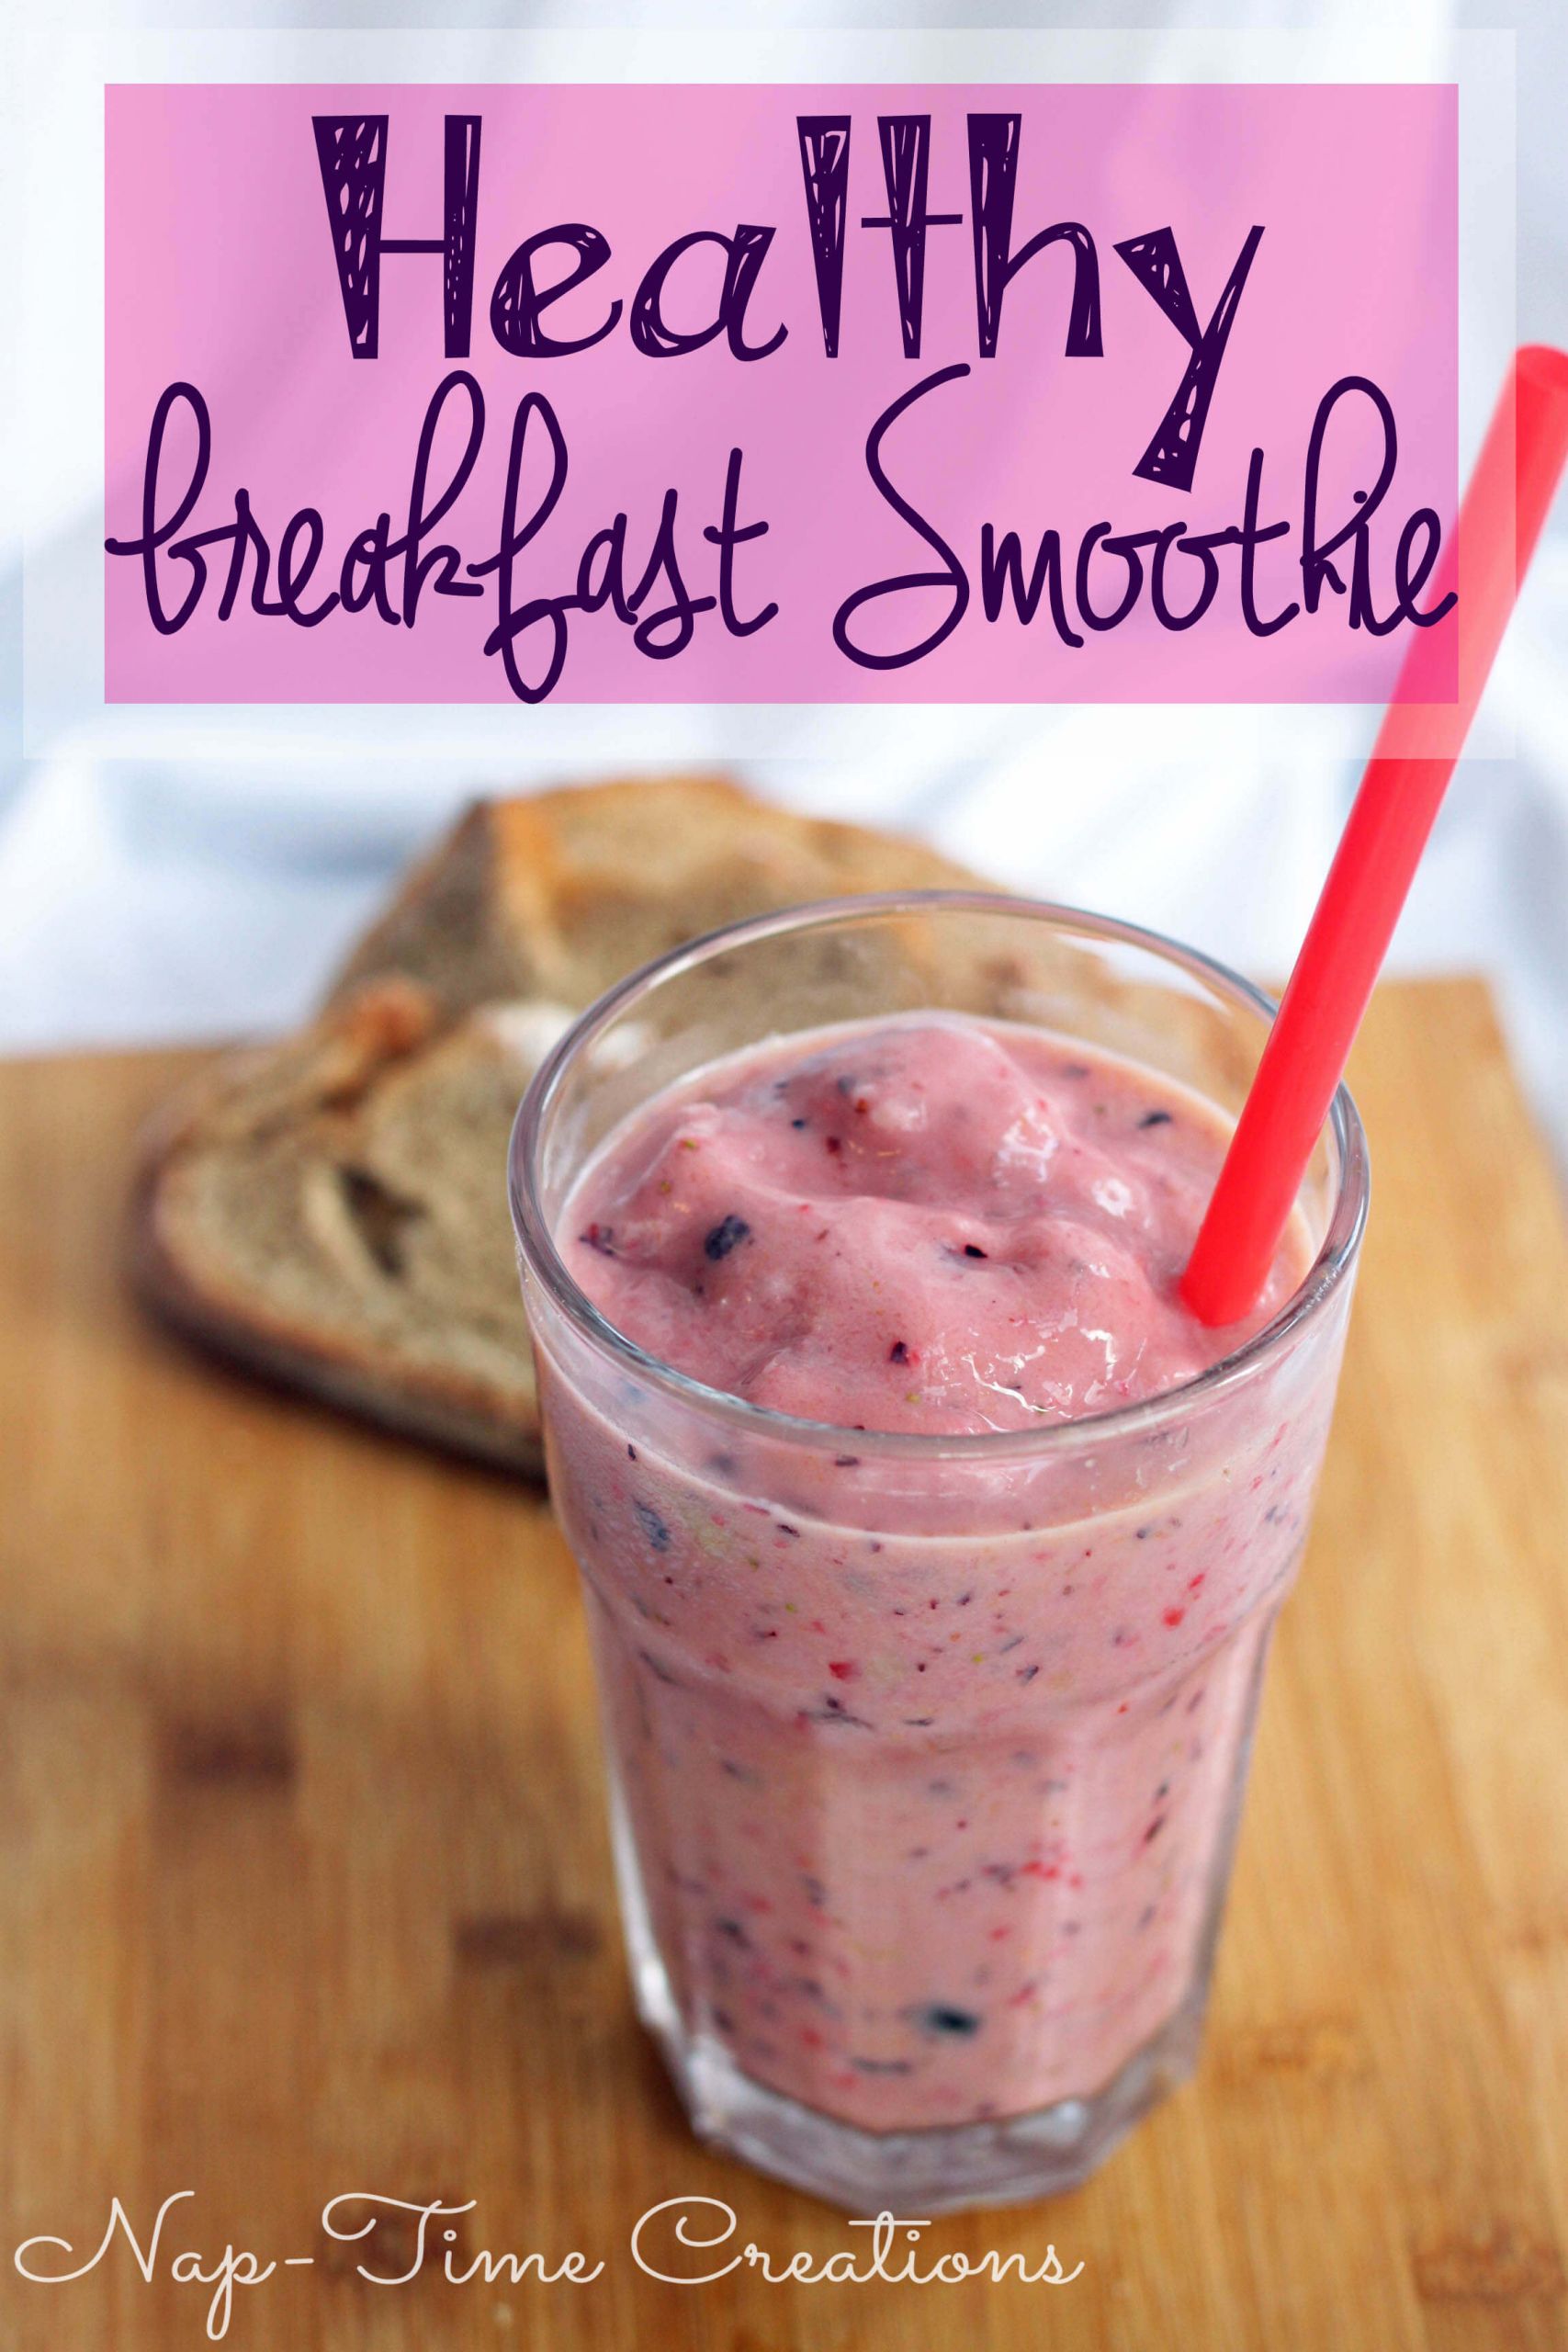 Healthy Smoothies For Breakfast
 Healthy Breakfast Smoothie Recipe Nap time Creations